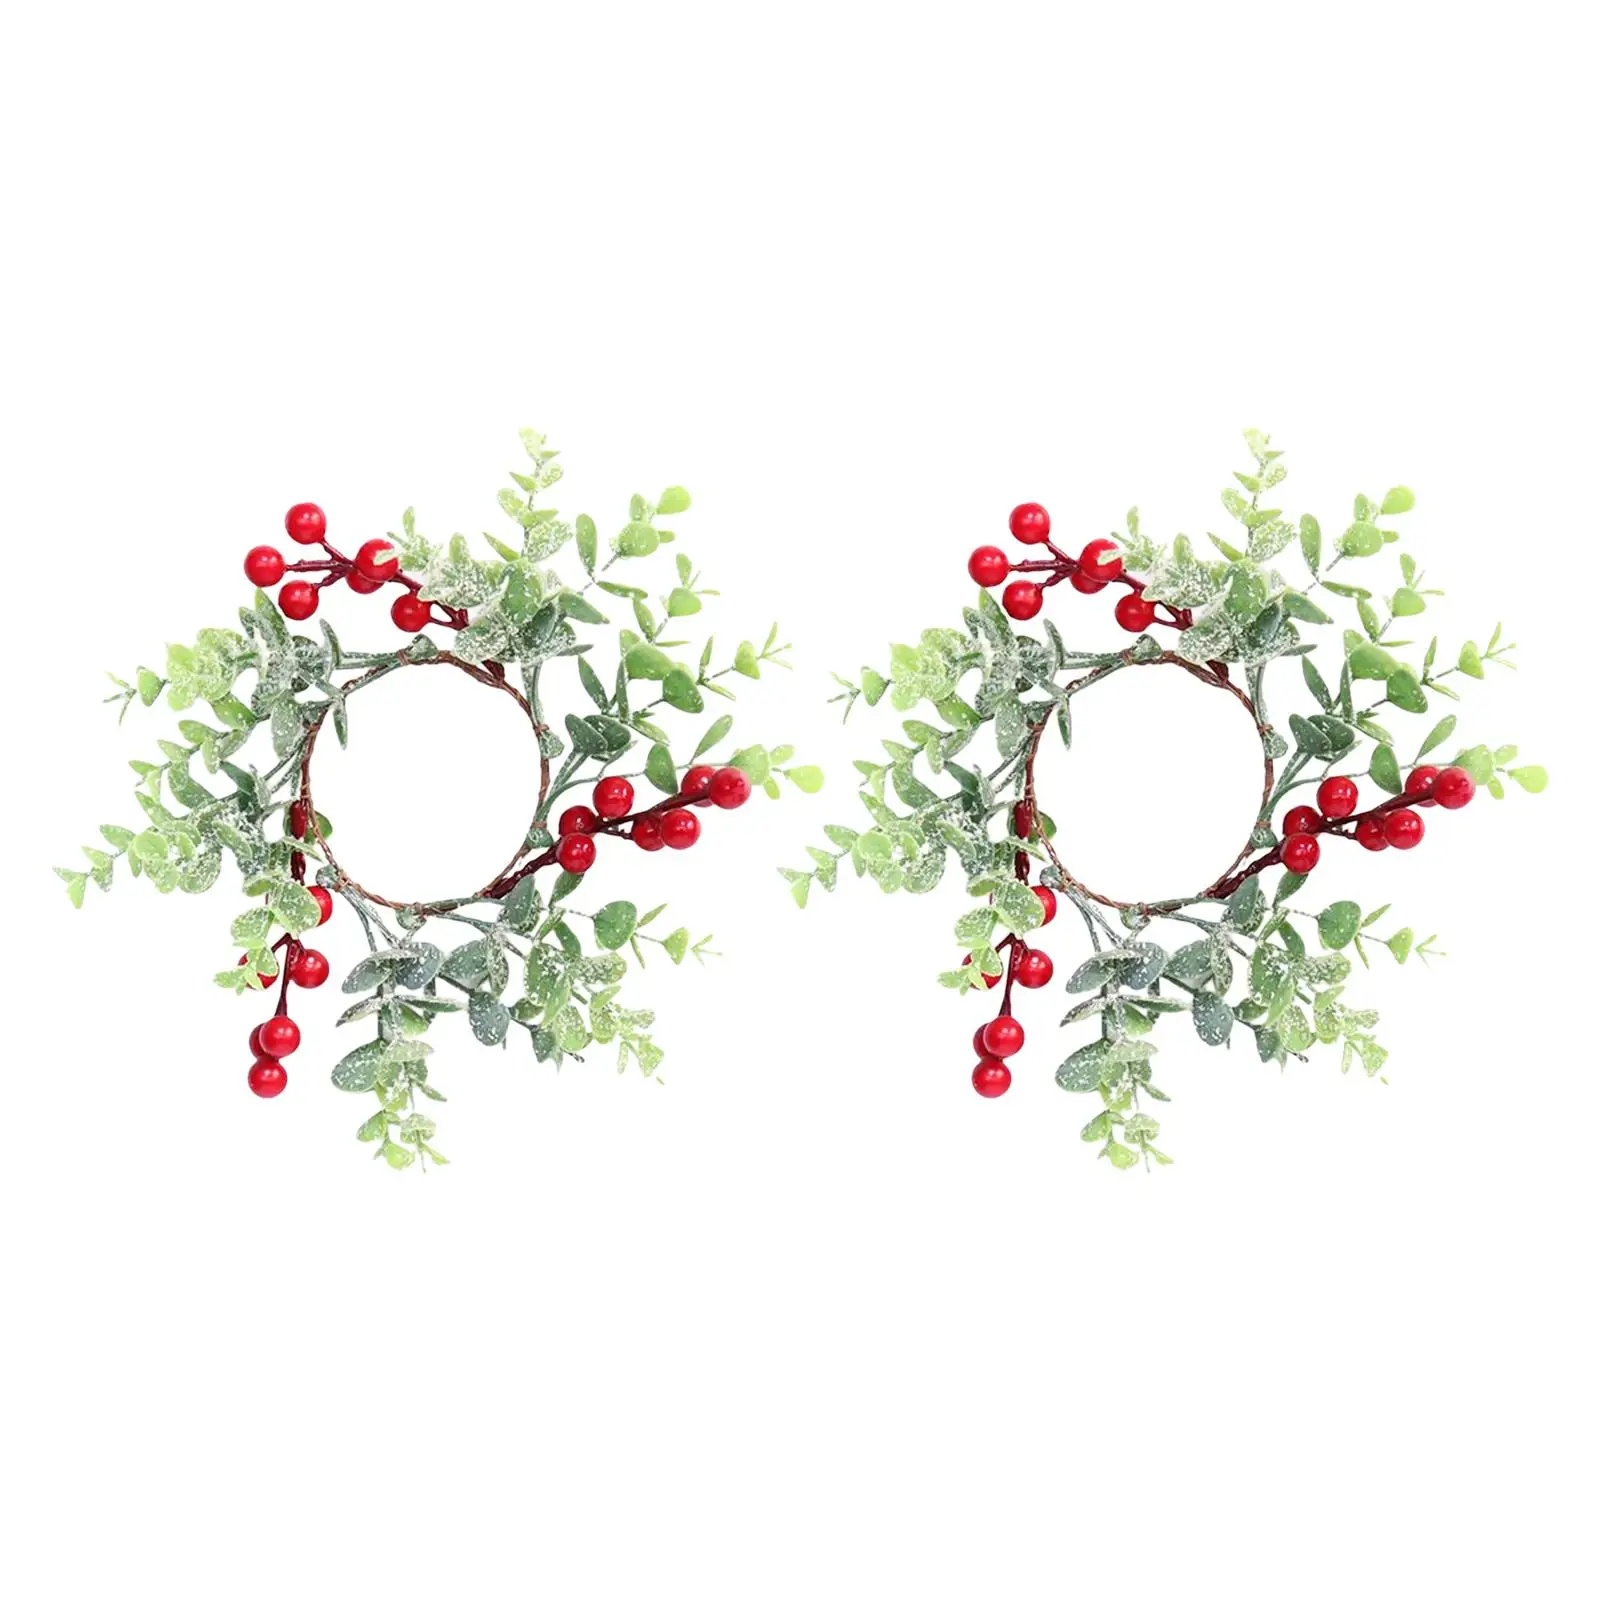 2 Pieces Easter Candle Rings Red Berries Garland Candles Base Holder Rustic Wreath for Decor Holiday Gift Festivals